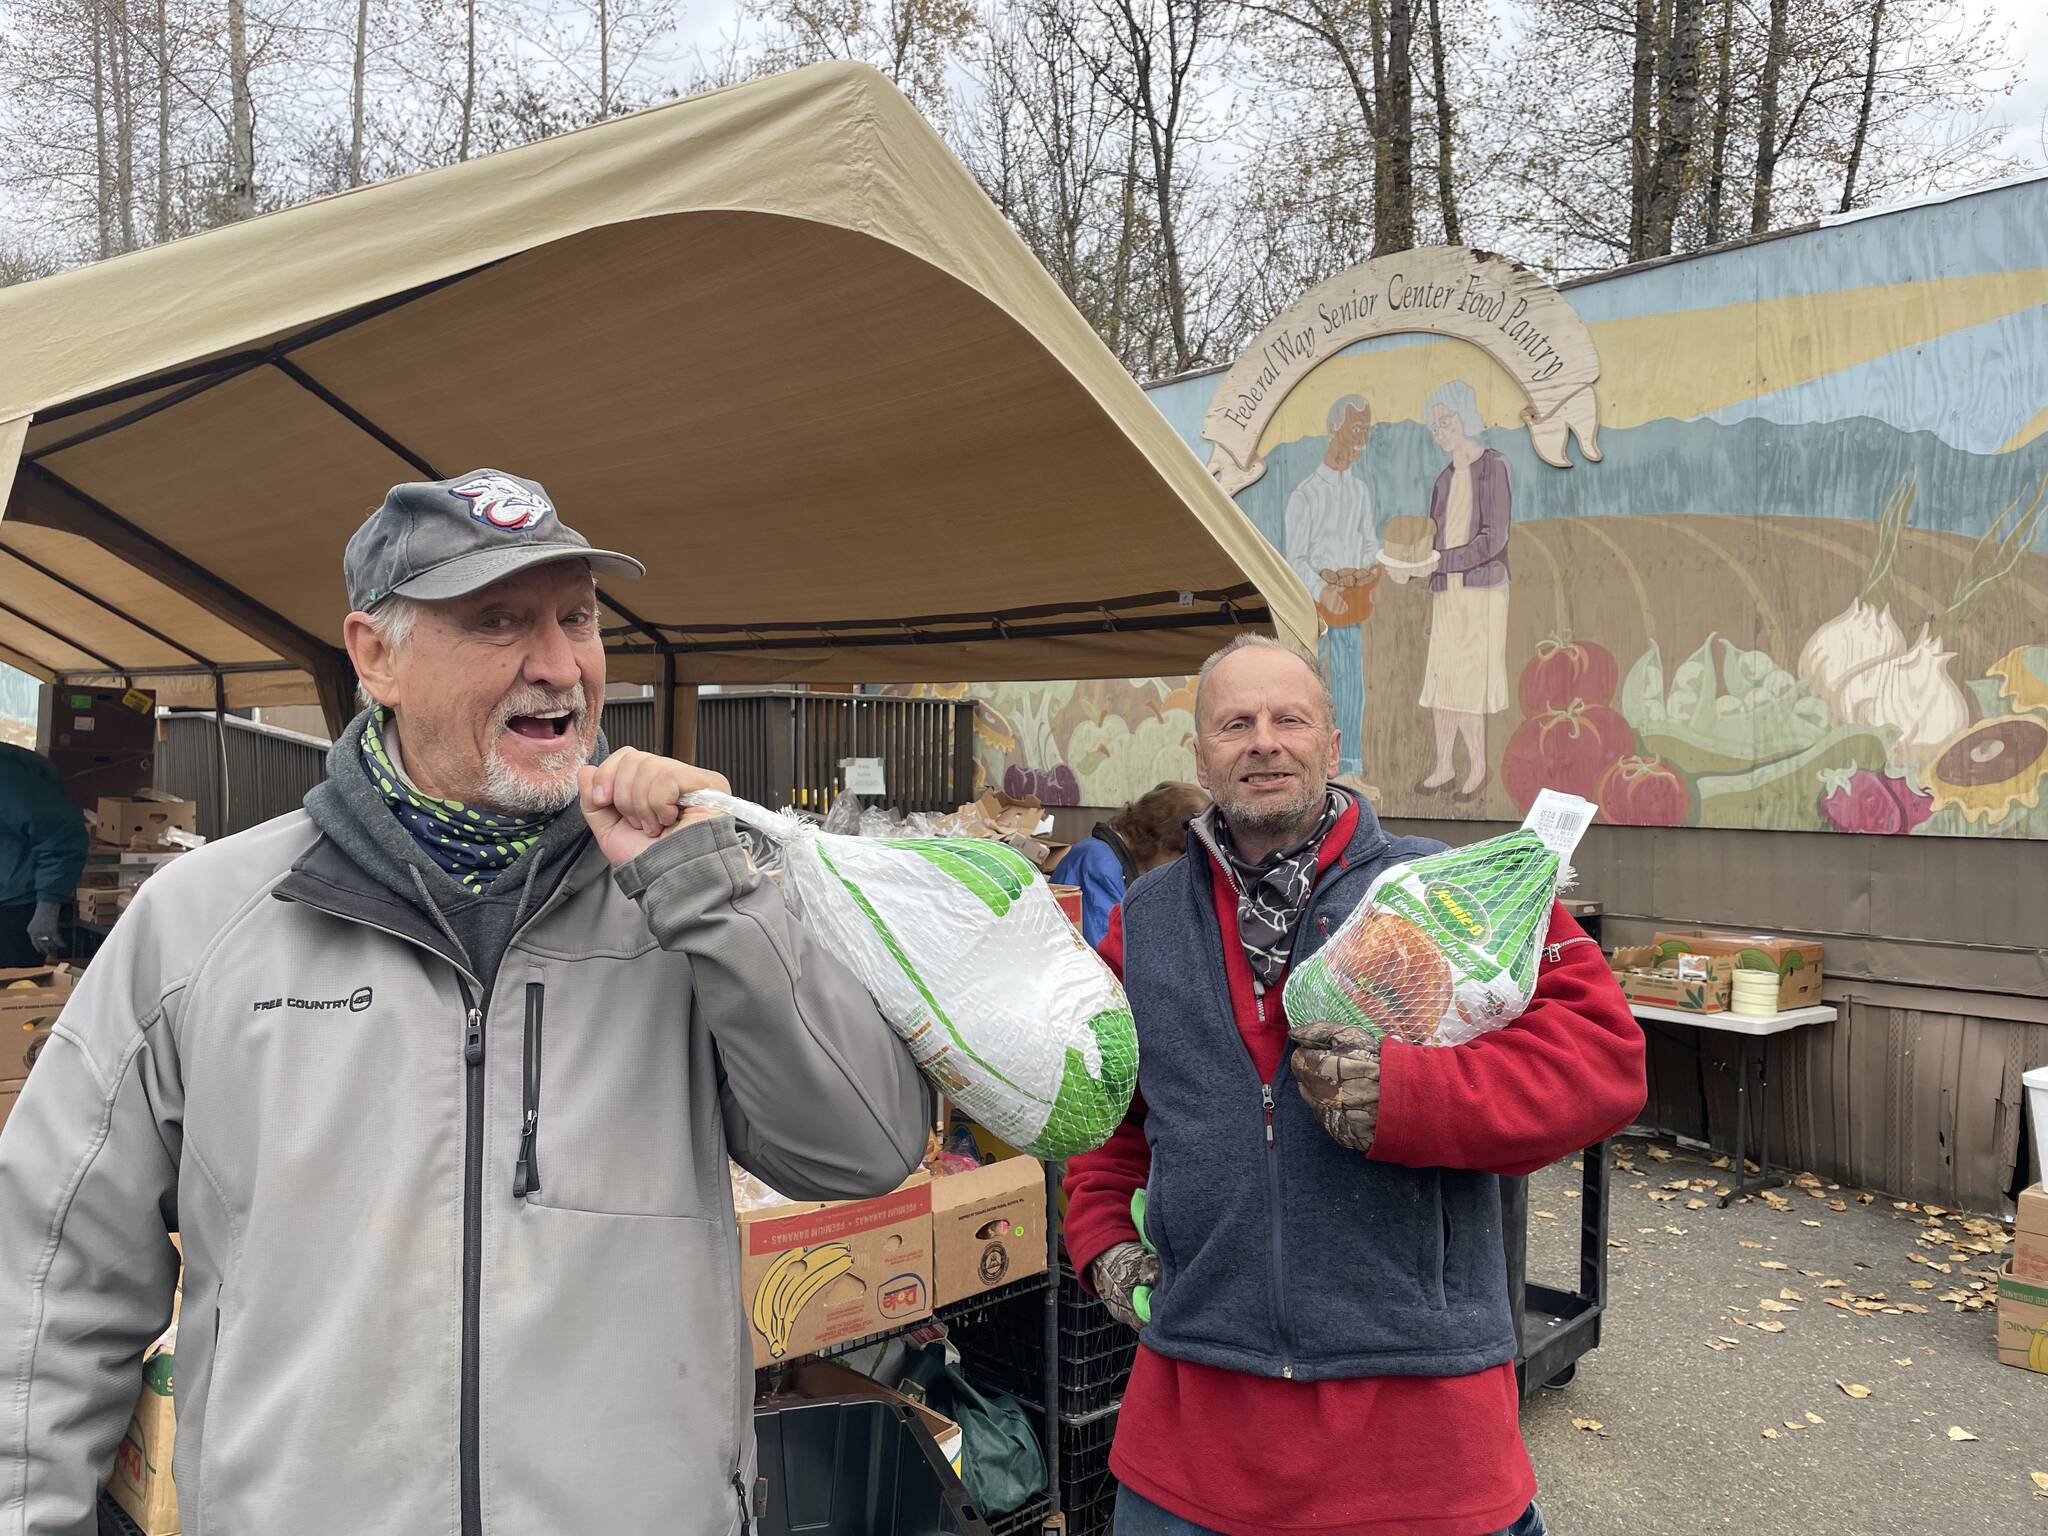 Volunteers help hand out Thanksgiving turkeys on Nov. 21. Photo courtesy of Shelley Pauls